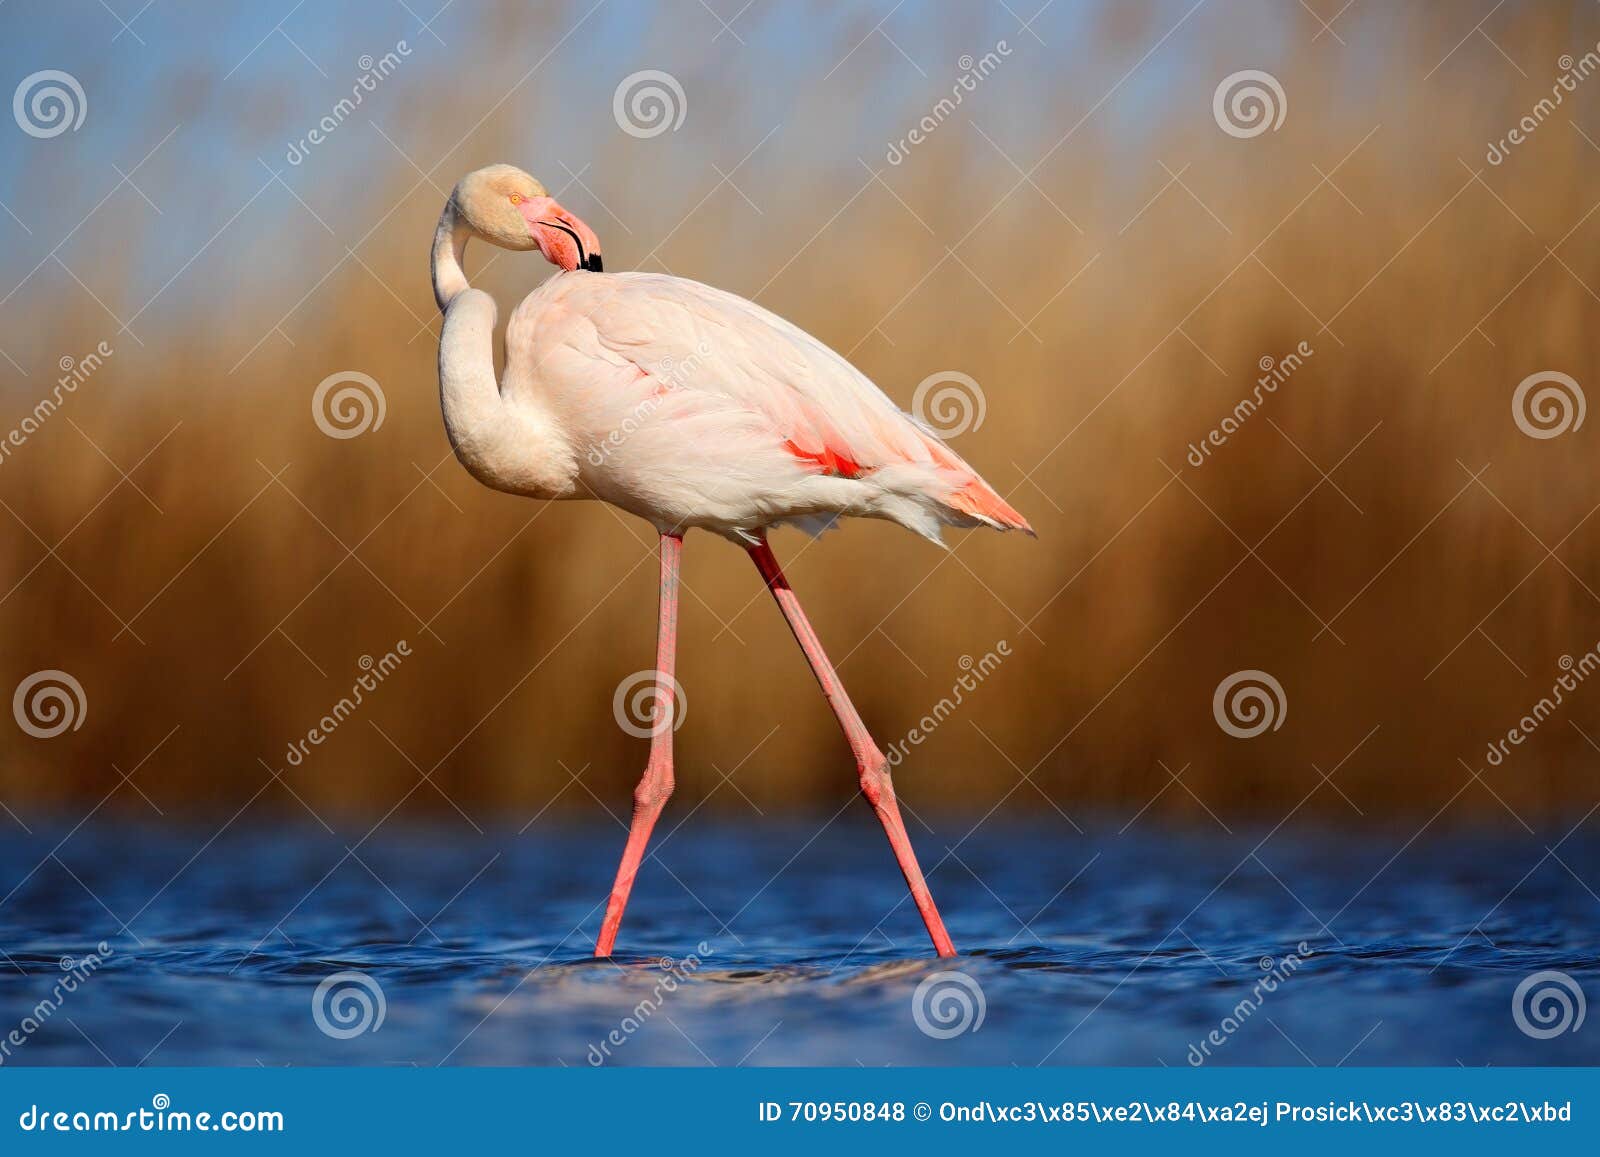 greater flamingo, phoenicopterus ruber, beautiful pink big bird cleaning plumage in dark blue water, with evening sun, reed in the